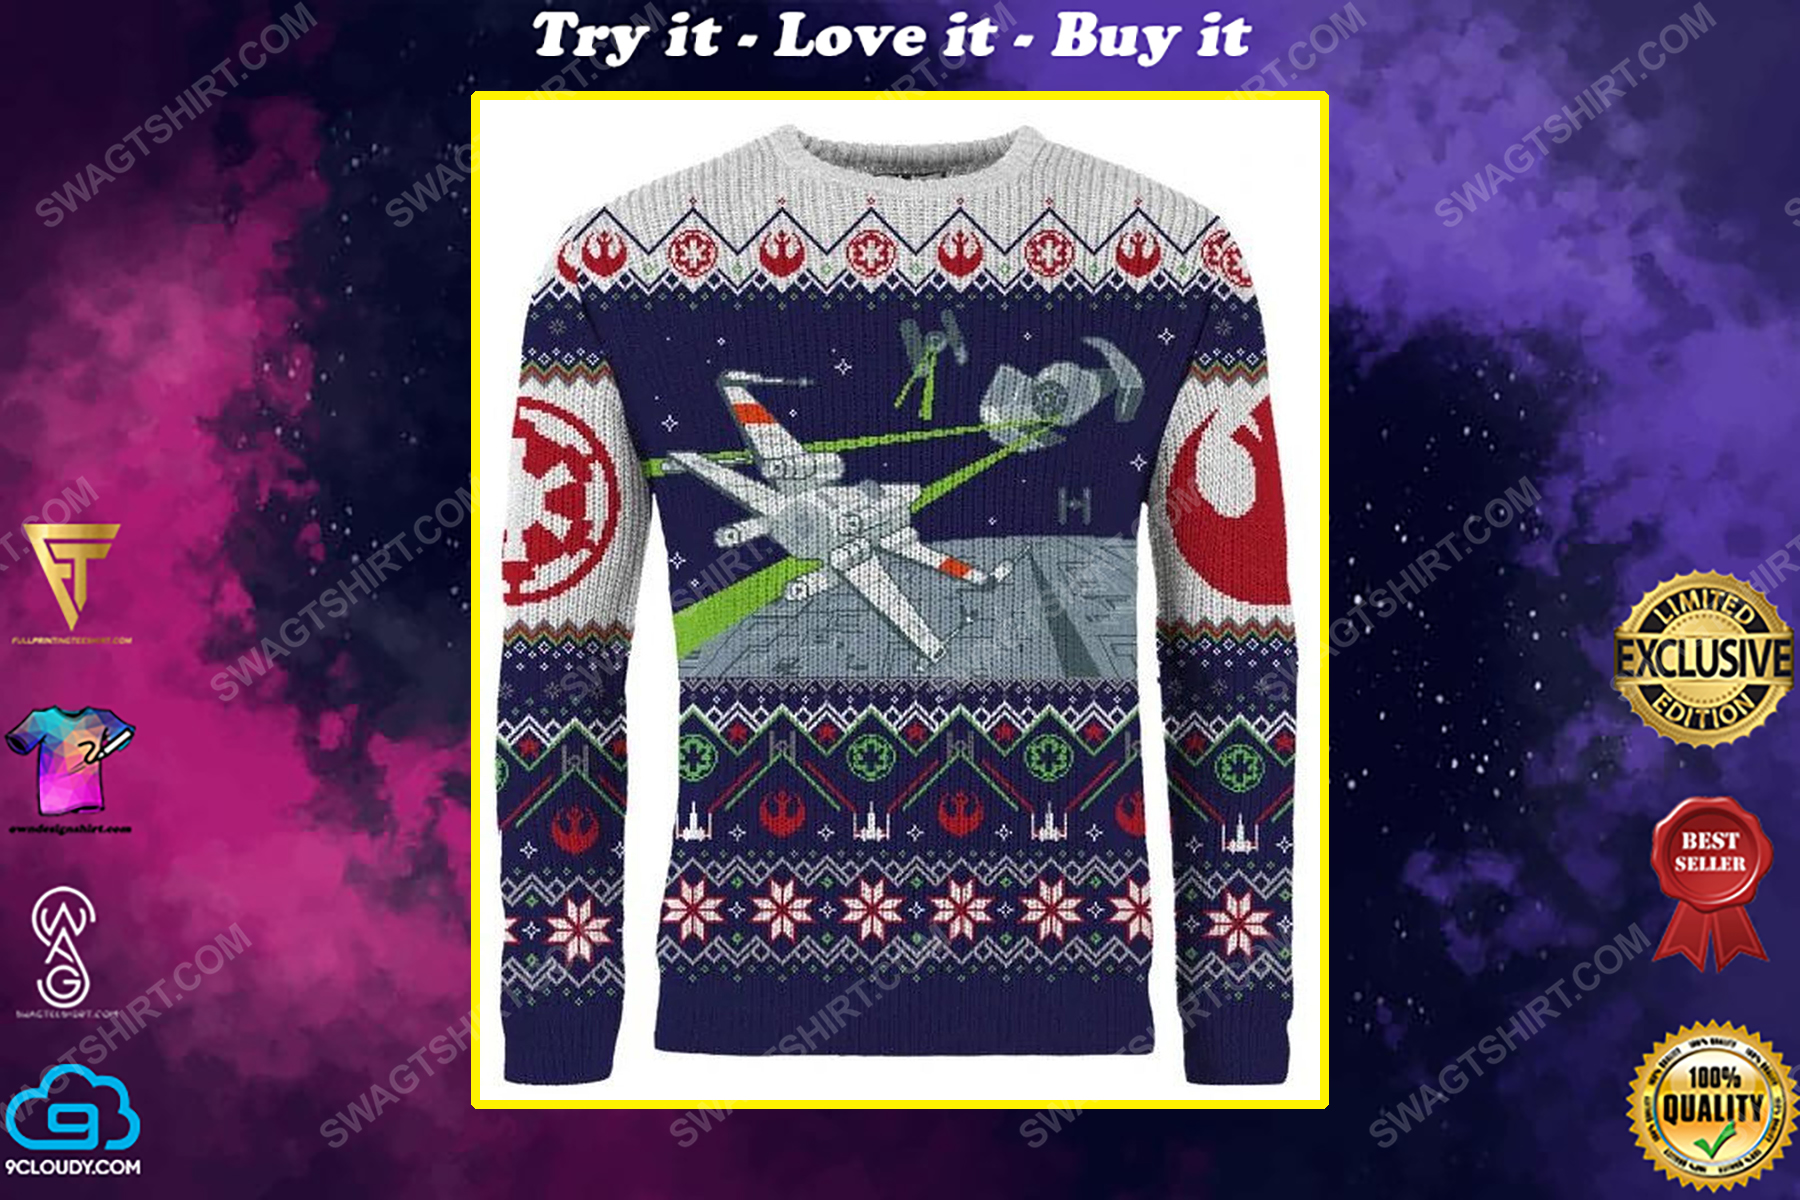 Star wars x-wing vs tie fighter ugly christmas sweater